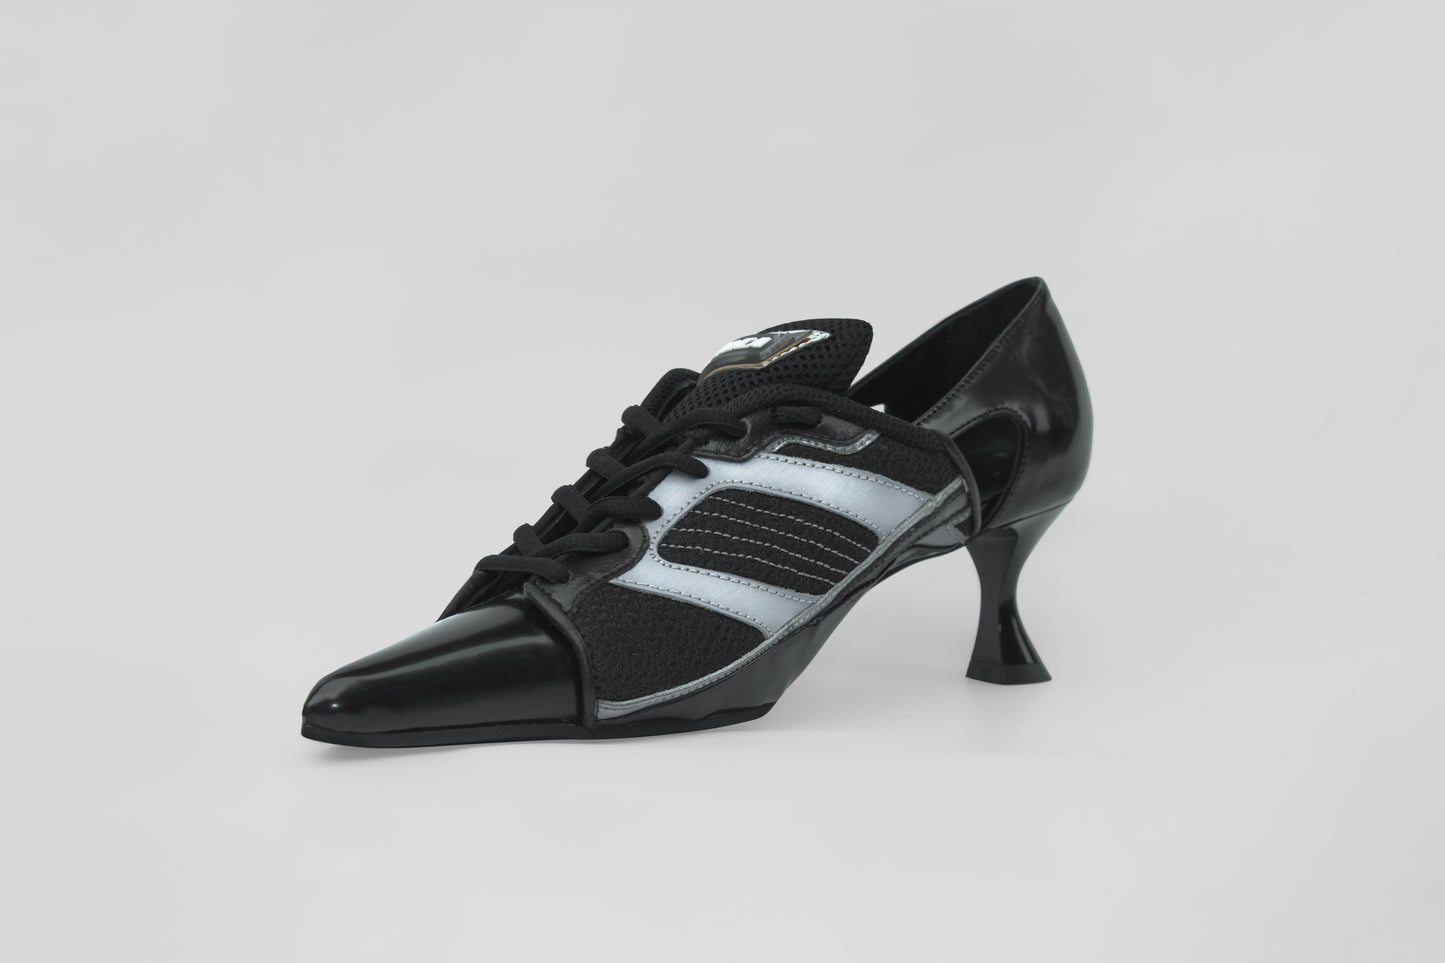 A photograph of the diagonal view of Ancuta Sarca Lamborghini Heel Black, 6CM HEEL, UPCYCLED TRAINER CLOSED BACK PUMPS, POINTY TOE, BLACK FAUX LEATHER